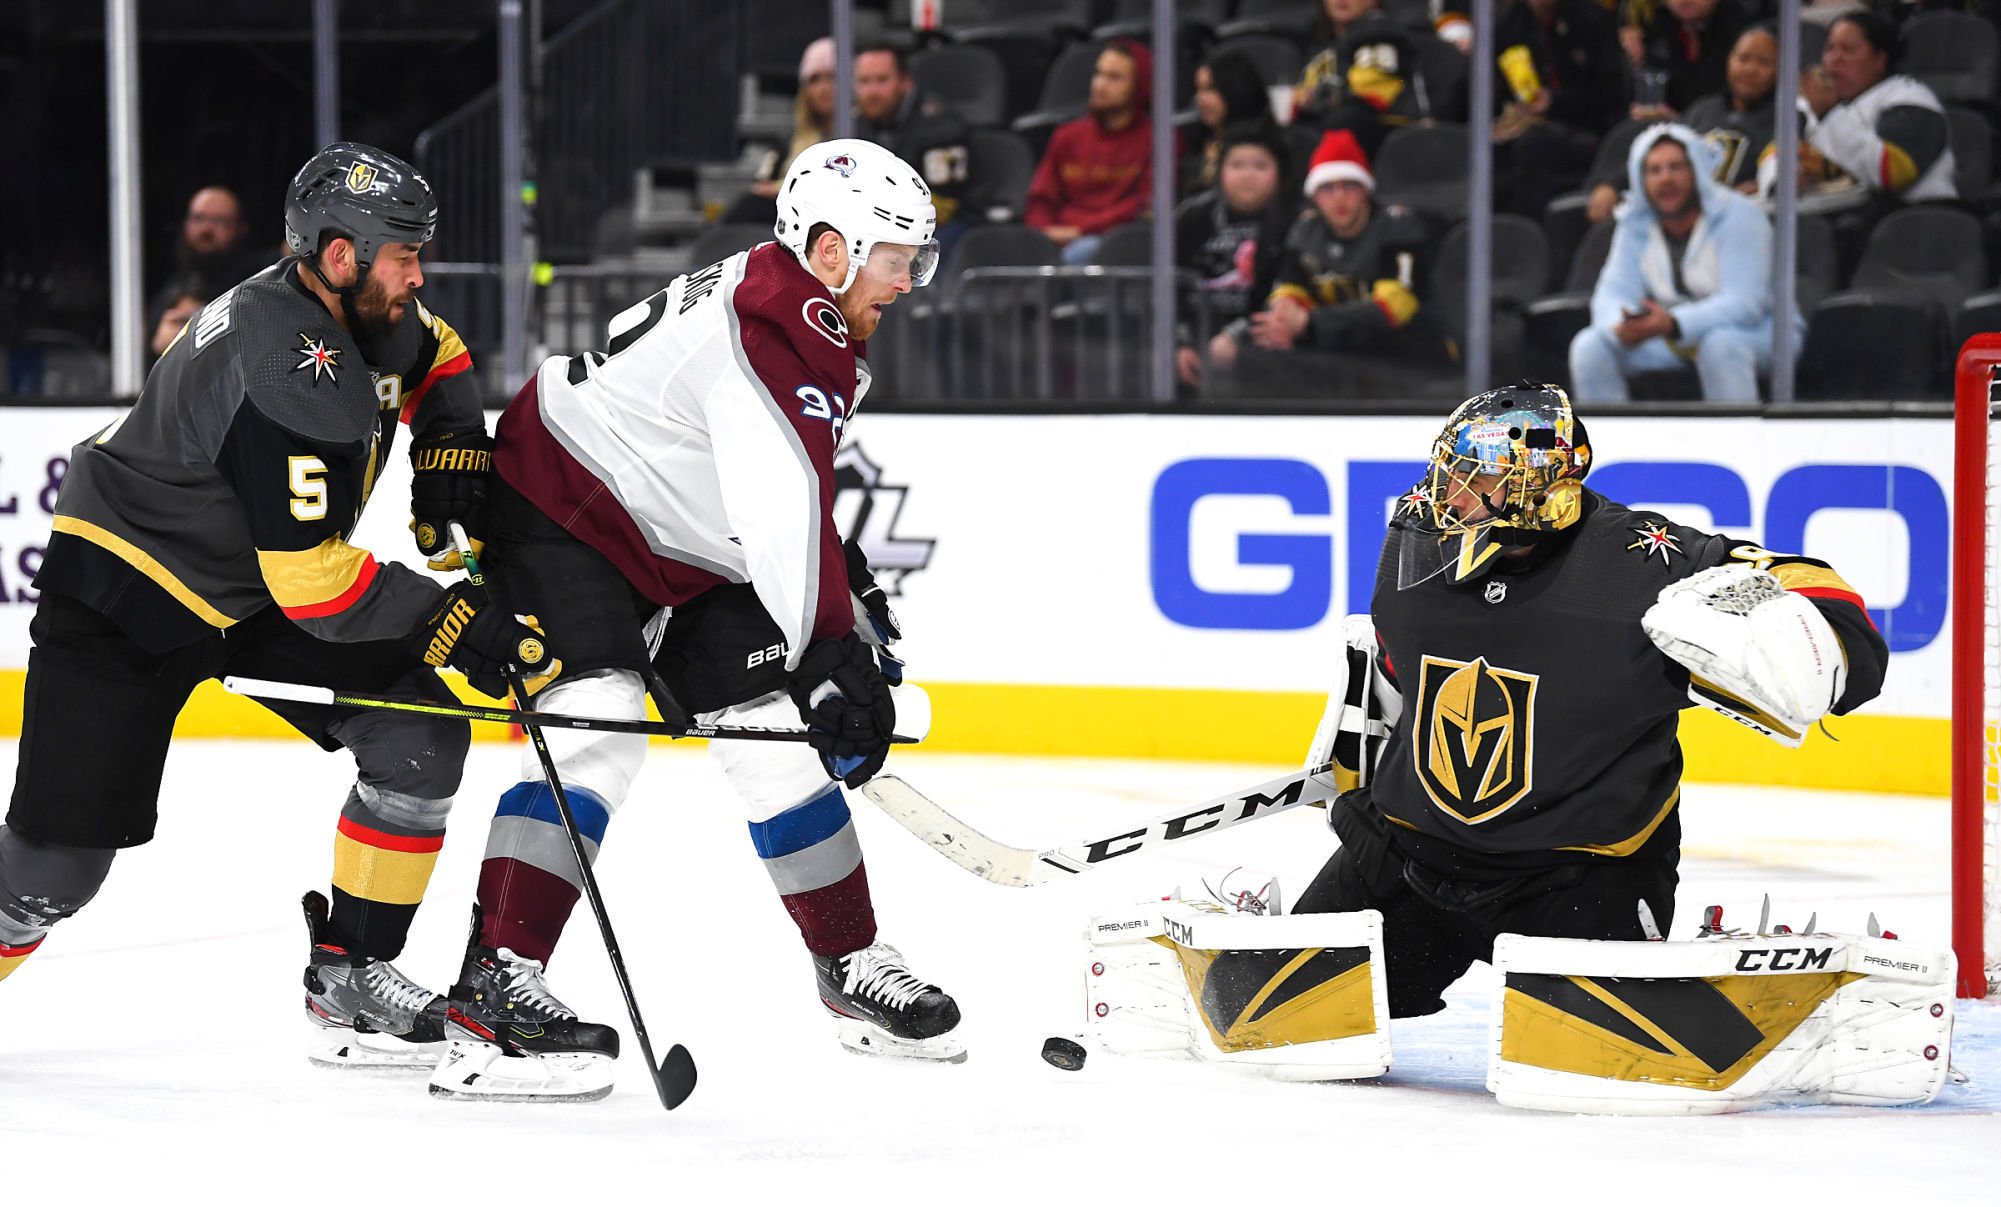 Dec 23, 2019; Las Vegas, Nevada, USA; Vegas Golden Knights goaltender Marc-Andre Fleury (29) makes a save against Colorado Avalanche left wing Gabriel Landeskog (92) as Vegas Golden Knights defenseman Deryk Engelland (5) trails the play during the third period at T-Mobile Arena. Mandatory Credit: Stephen R. Sylvanie-USA TODAY Sports 
Photo by Icon Sport - Marc-Andre FLEURY - Deryk ENGELLAND - Gabriel LANDESKOG